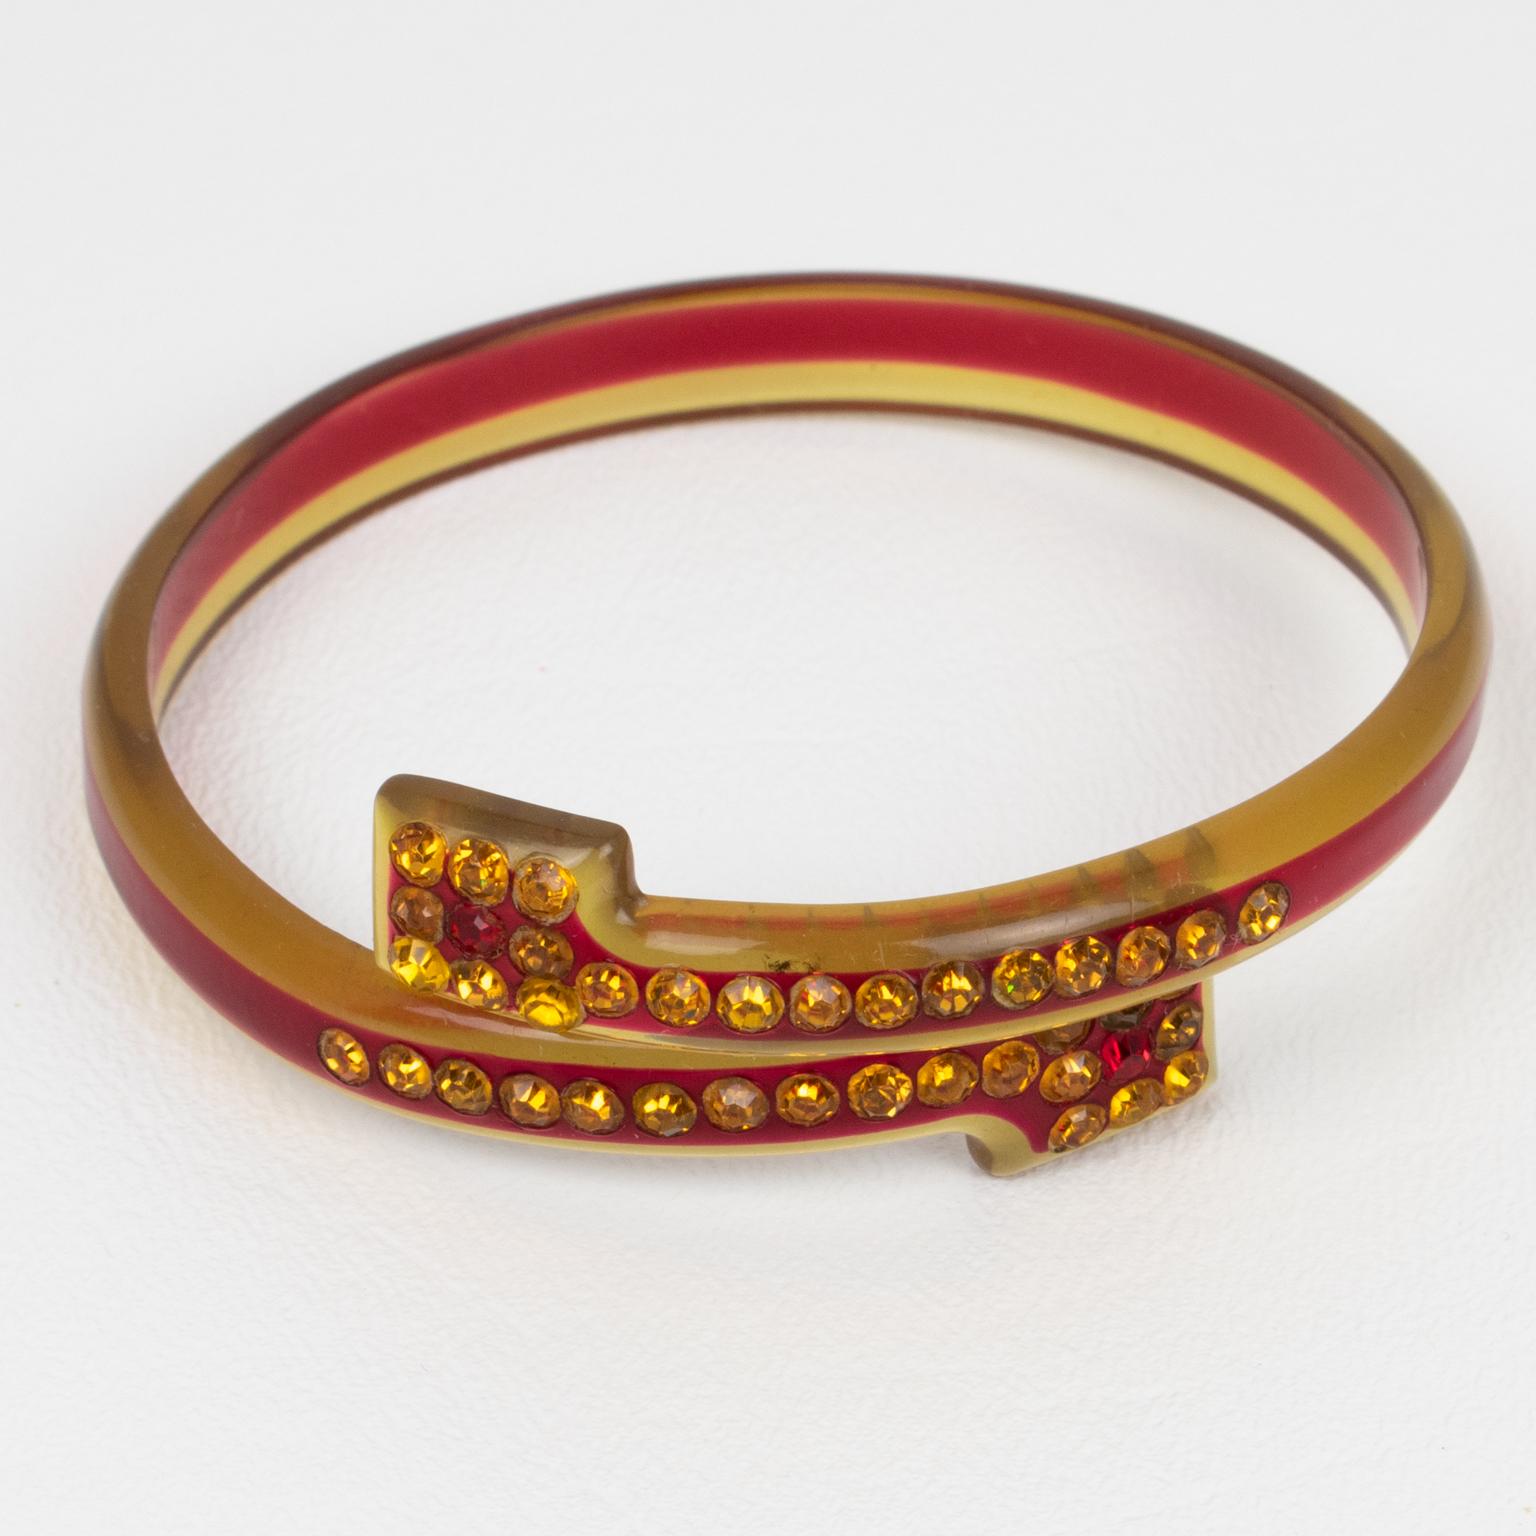 This stunning French celluloid and sparkle bypass bracelet bangle dates from the 1920s. The piece boasts transparent apple juice and red colors with a geometric design and is embellished with orange topaz and ruby-red crystal rhinestones. The 1920s